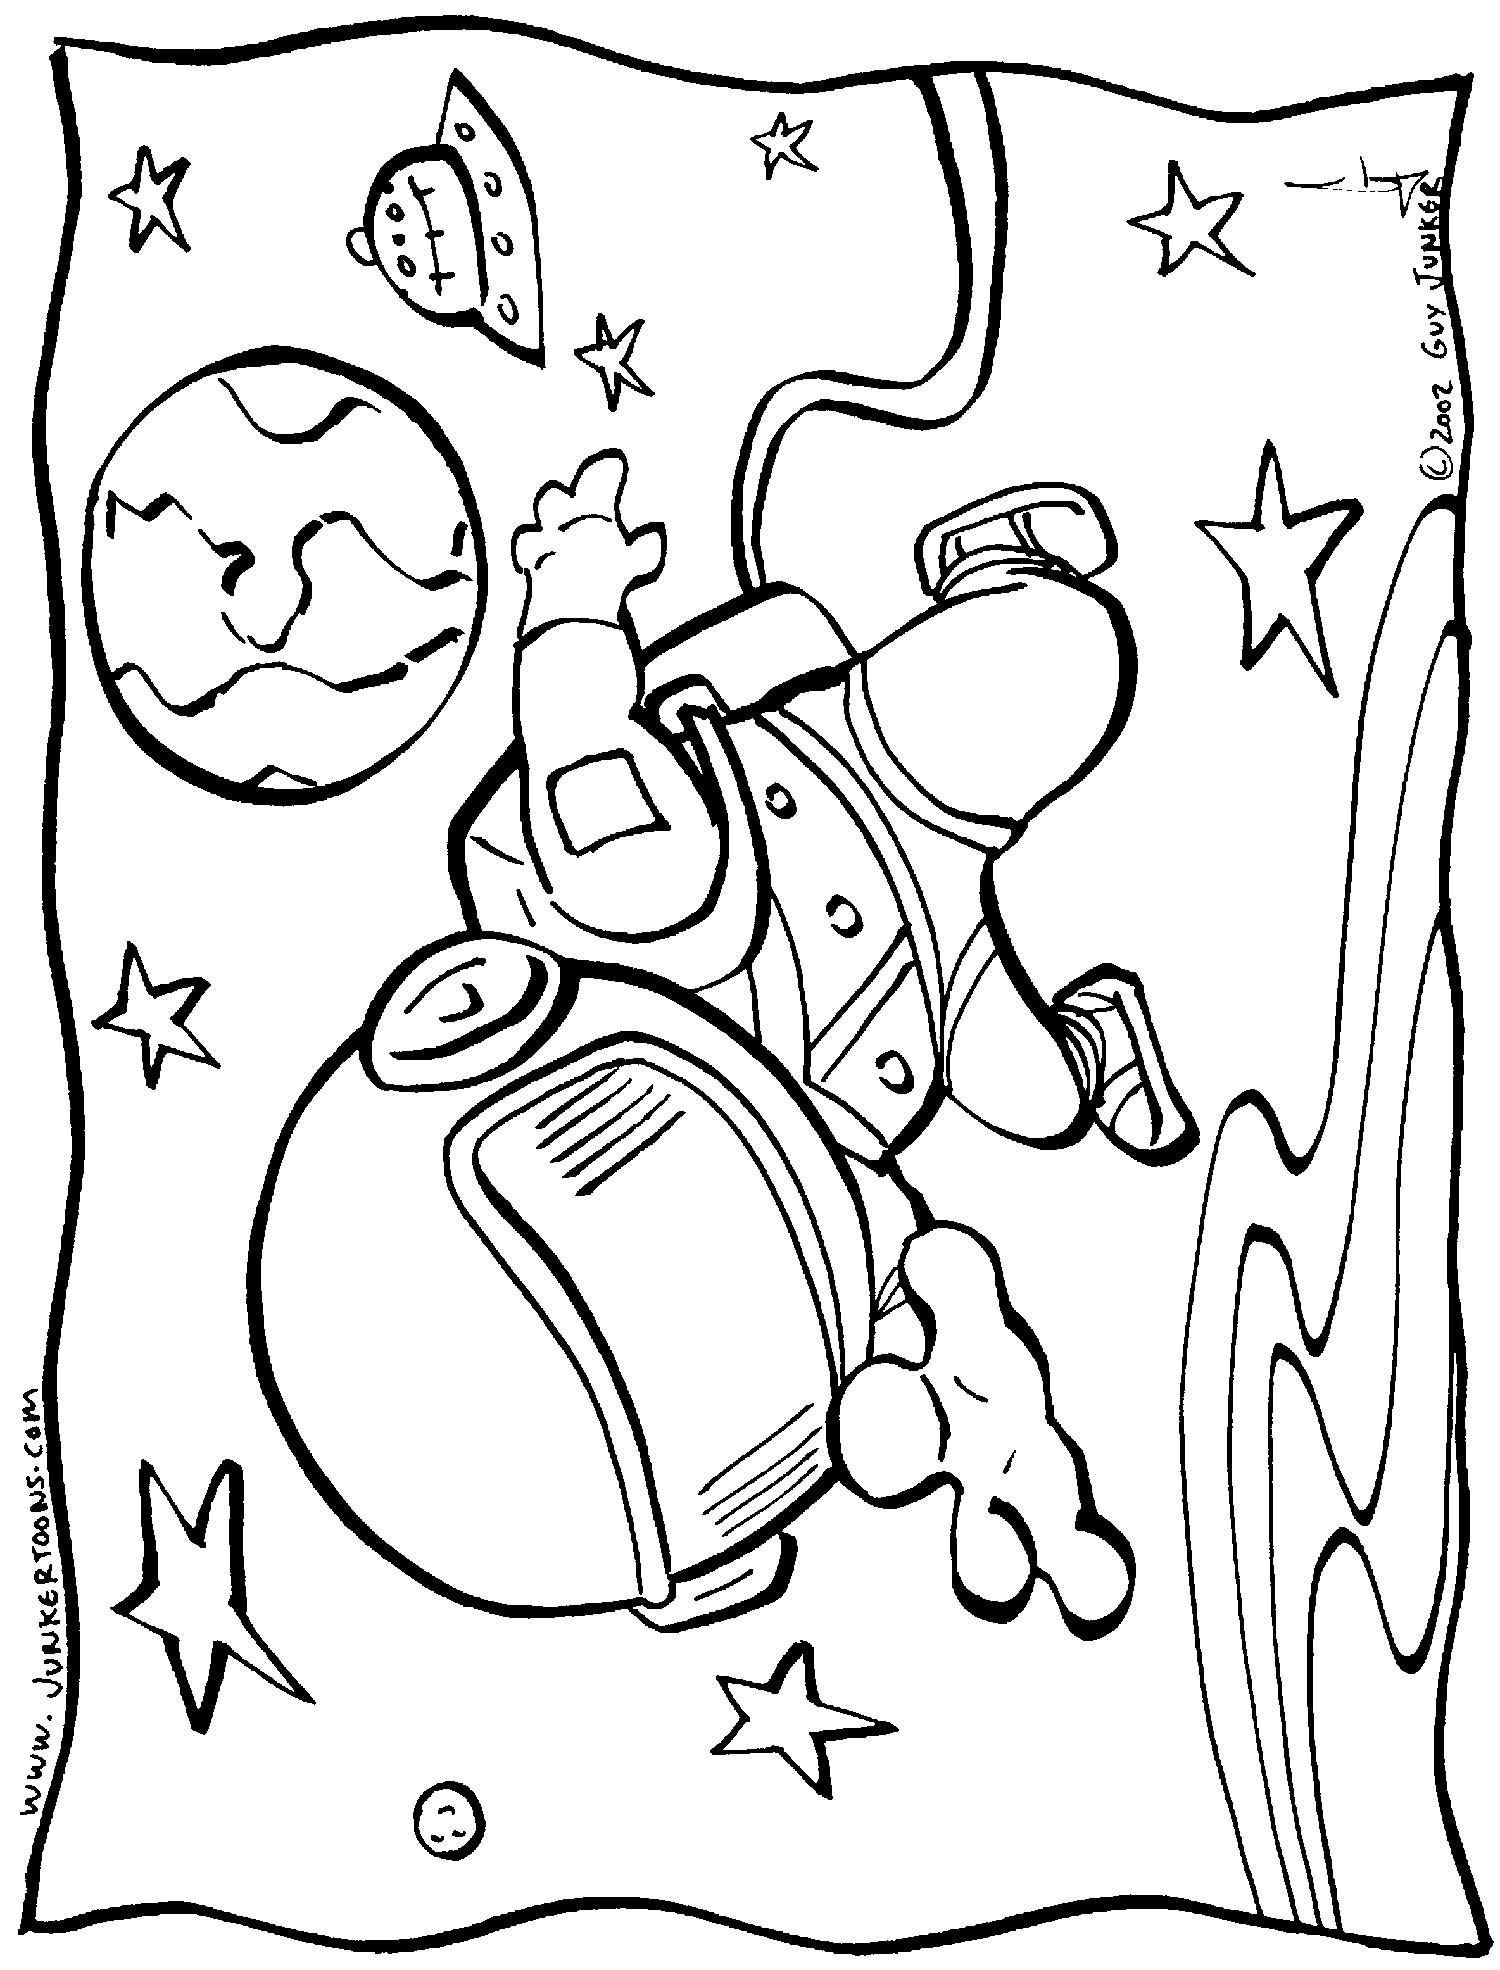 space coloring pages free printable space coloring page space coloring page 2669 space space free pages printable coloring 